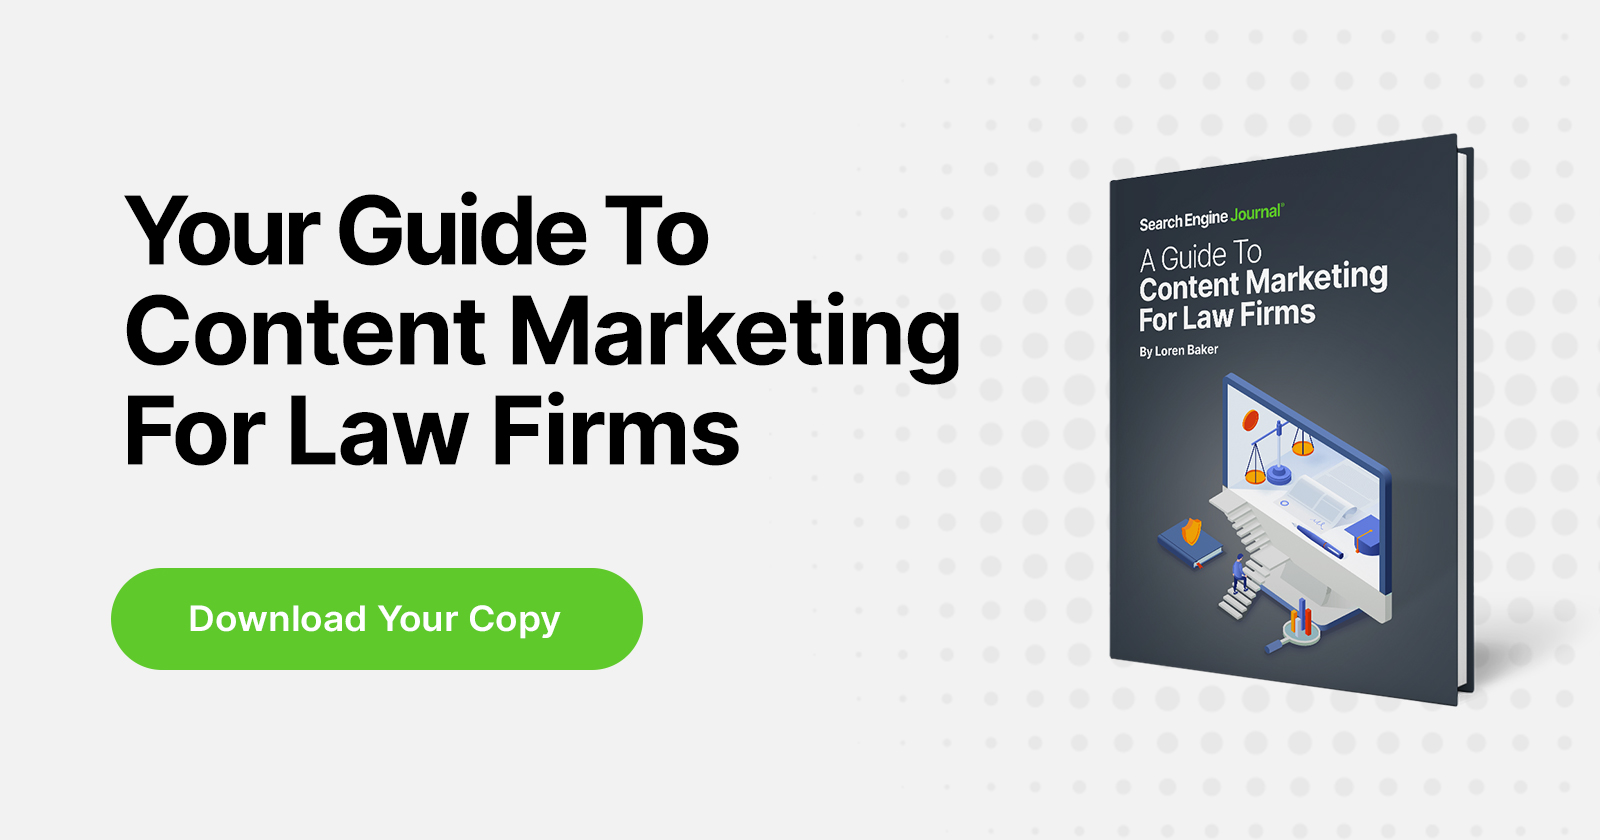 Content Marketing For Law Firms: Expand Your Reach & Increase Your Search Rankings